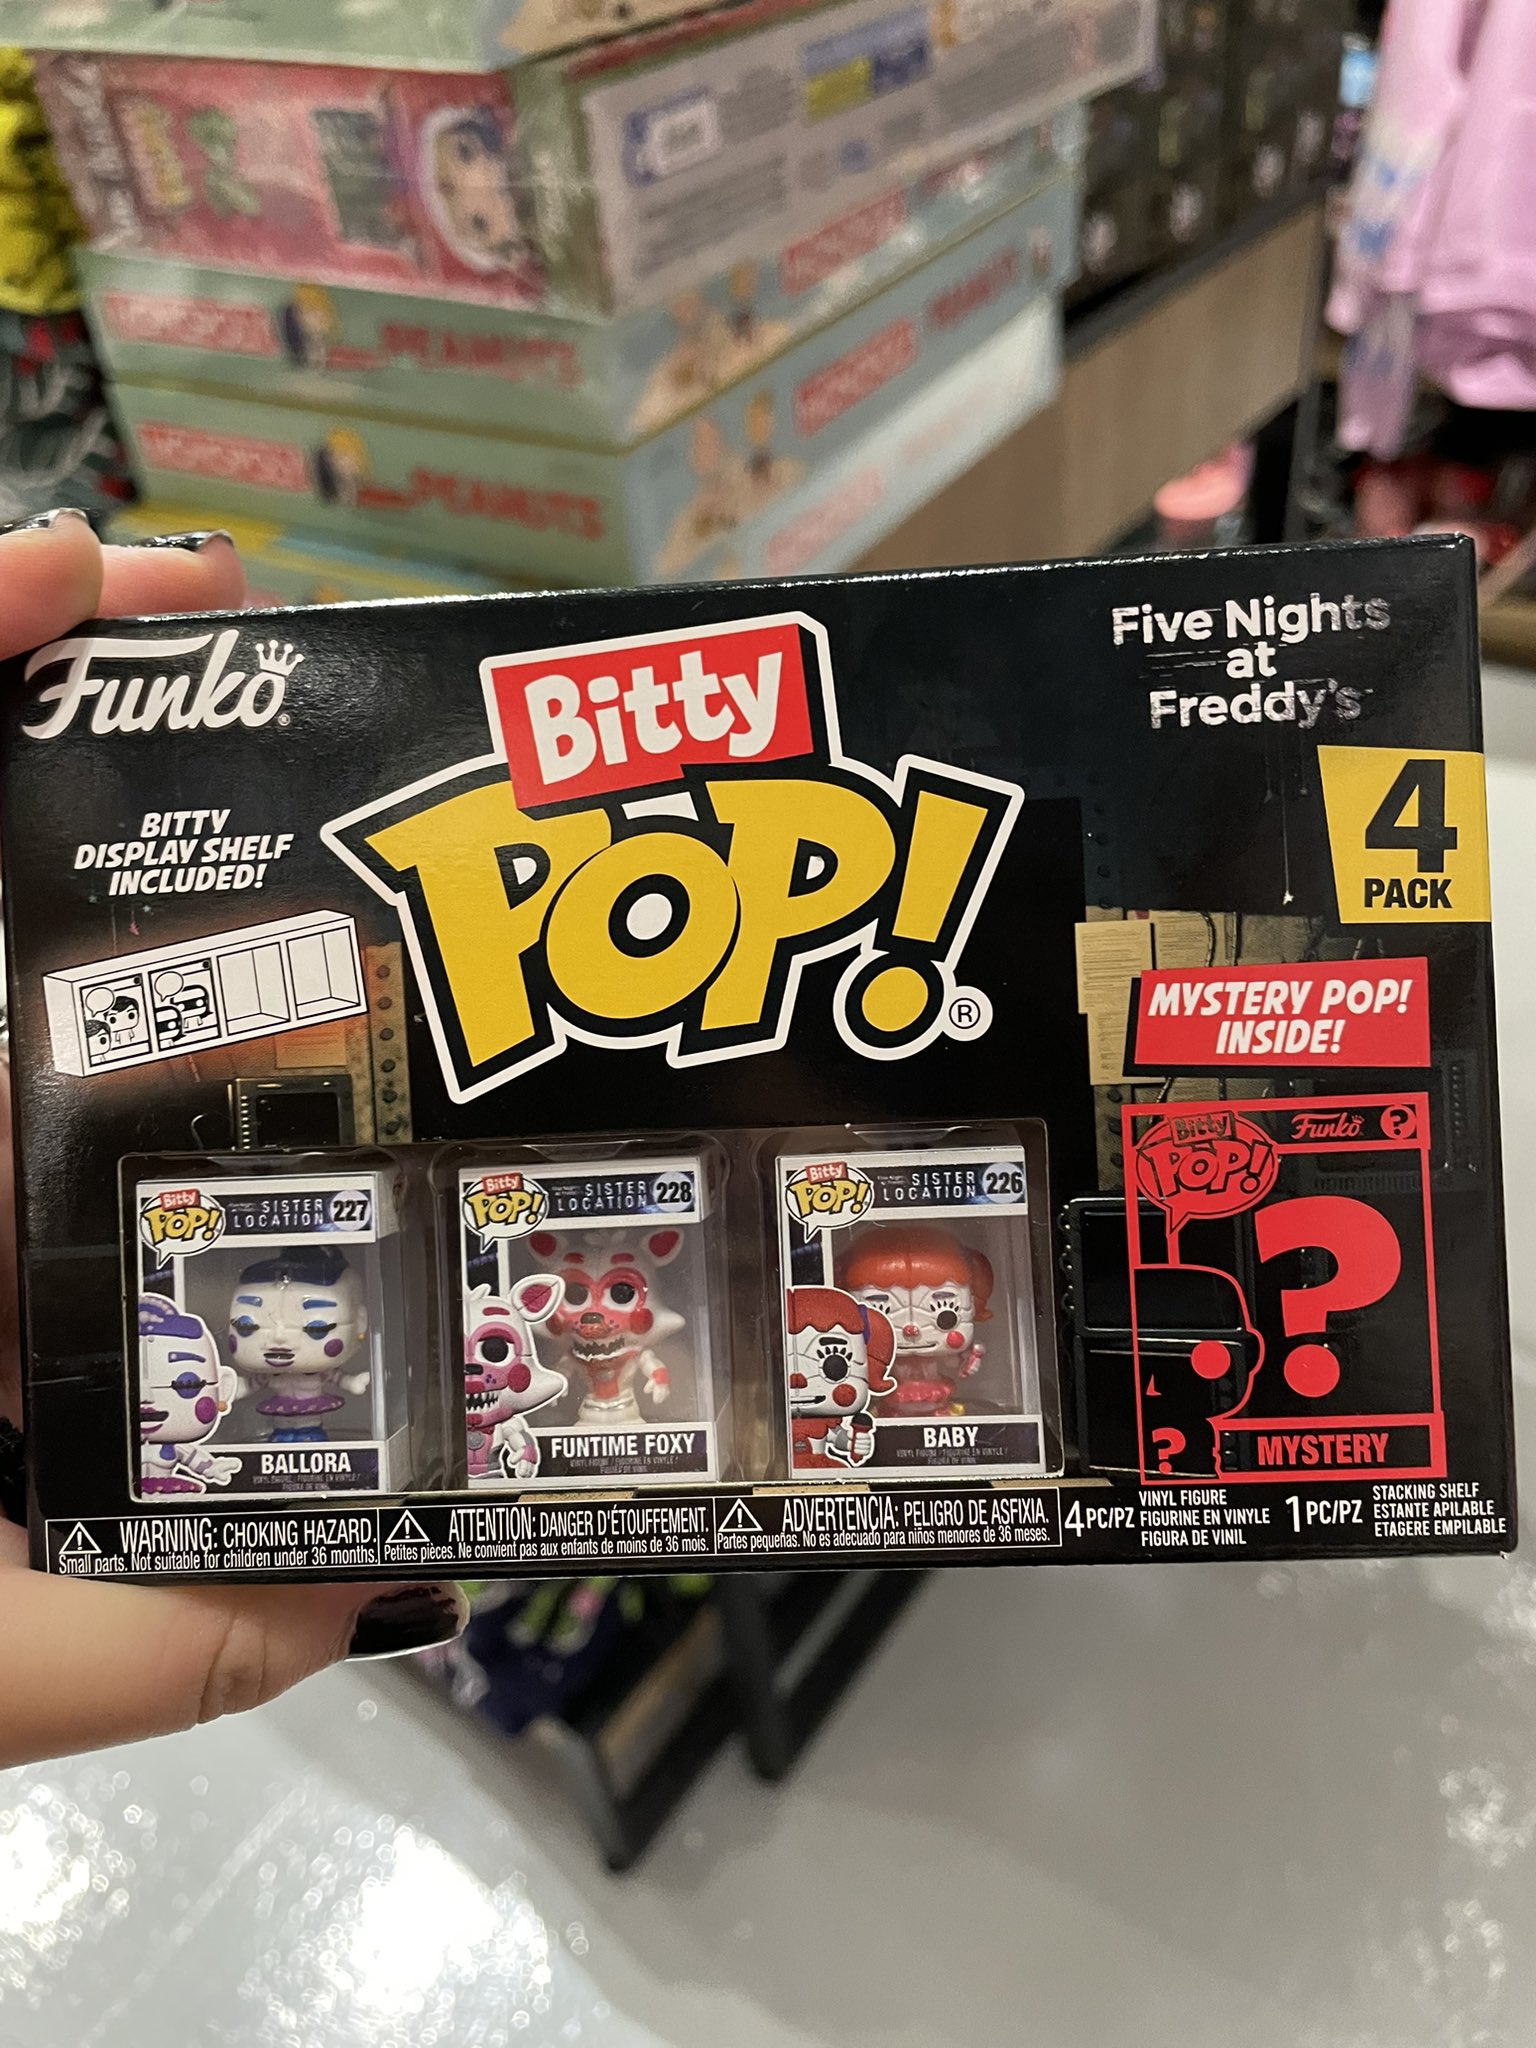 Funko Bitty Pop! Five Nights at Freddy's 4-pack- Ballora, Funtime